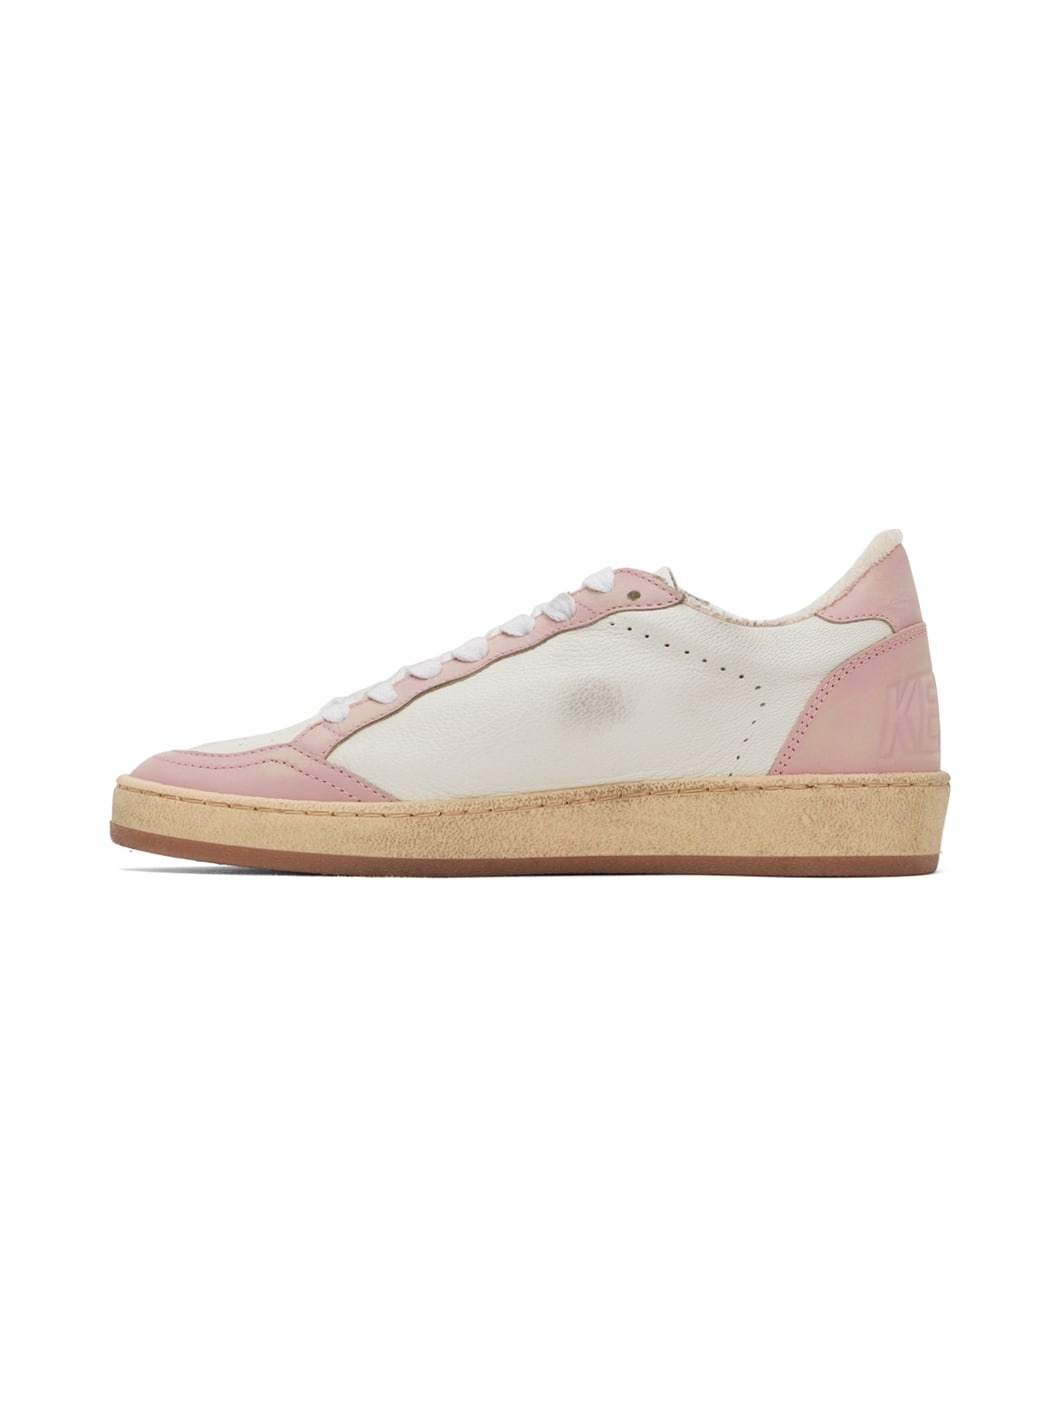 White & Pink Ball Star Sneakers - 3